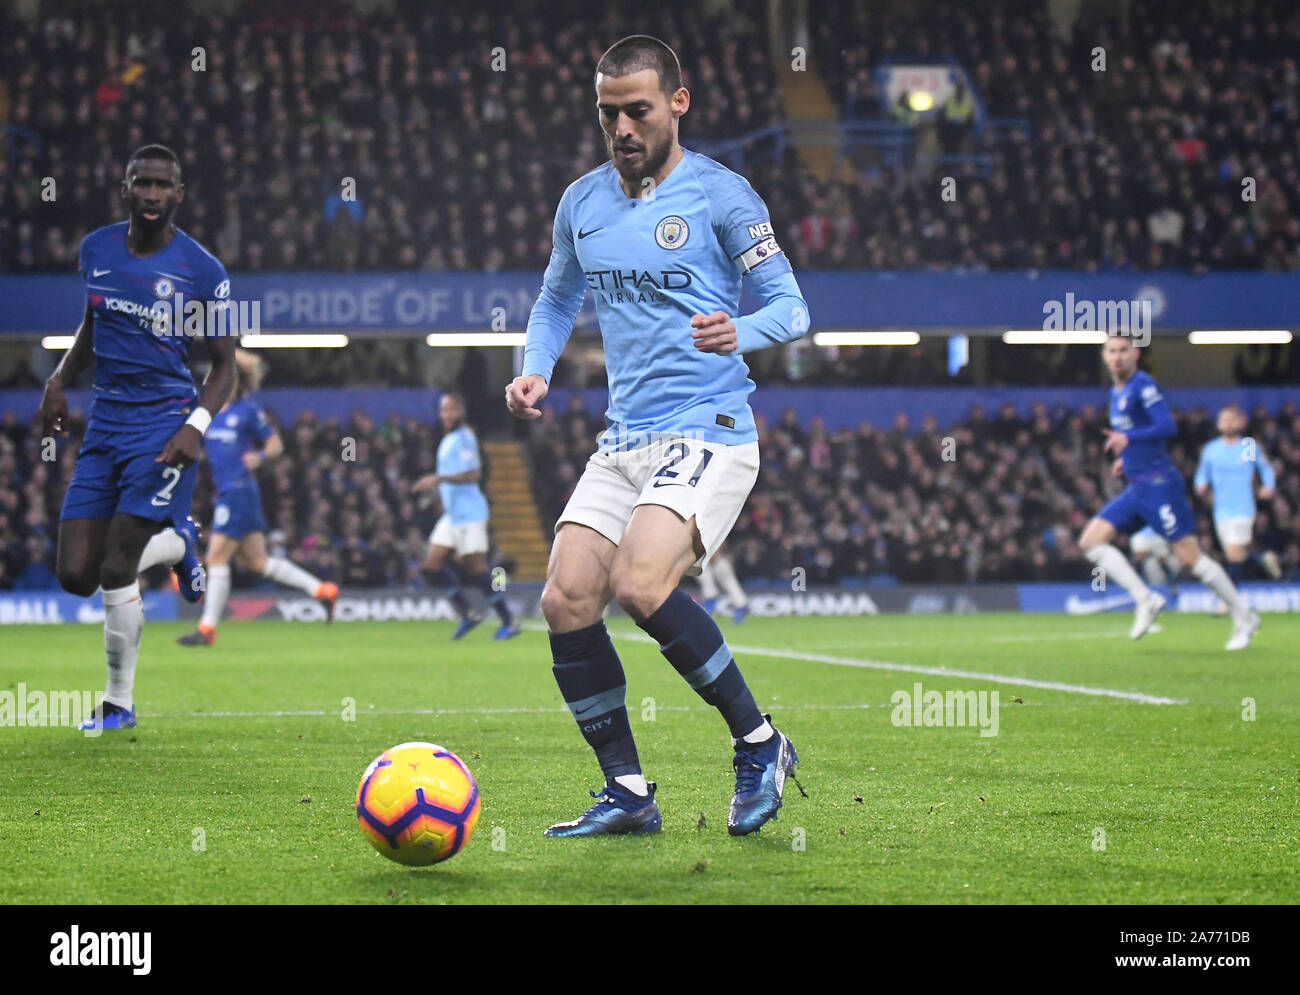 LONDON, ENGLAND - DECEMBER 8, 2018: David Silva of City pictured during the 2018/19 Premier League game between Chelsea FC and Manchester City at Stamford Bridge. Stock Photo